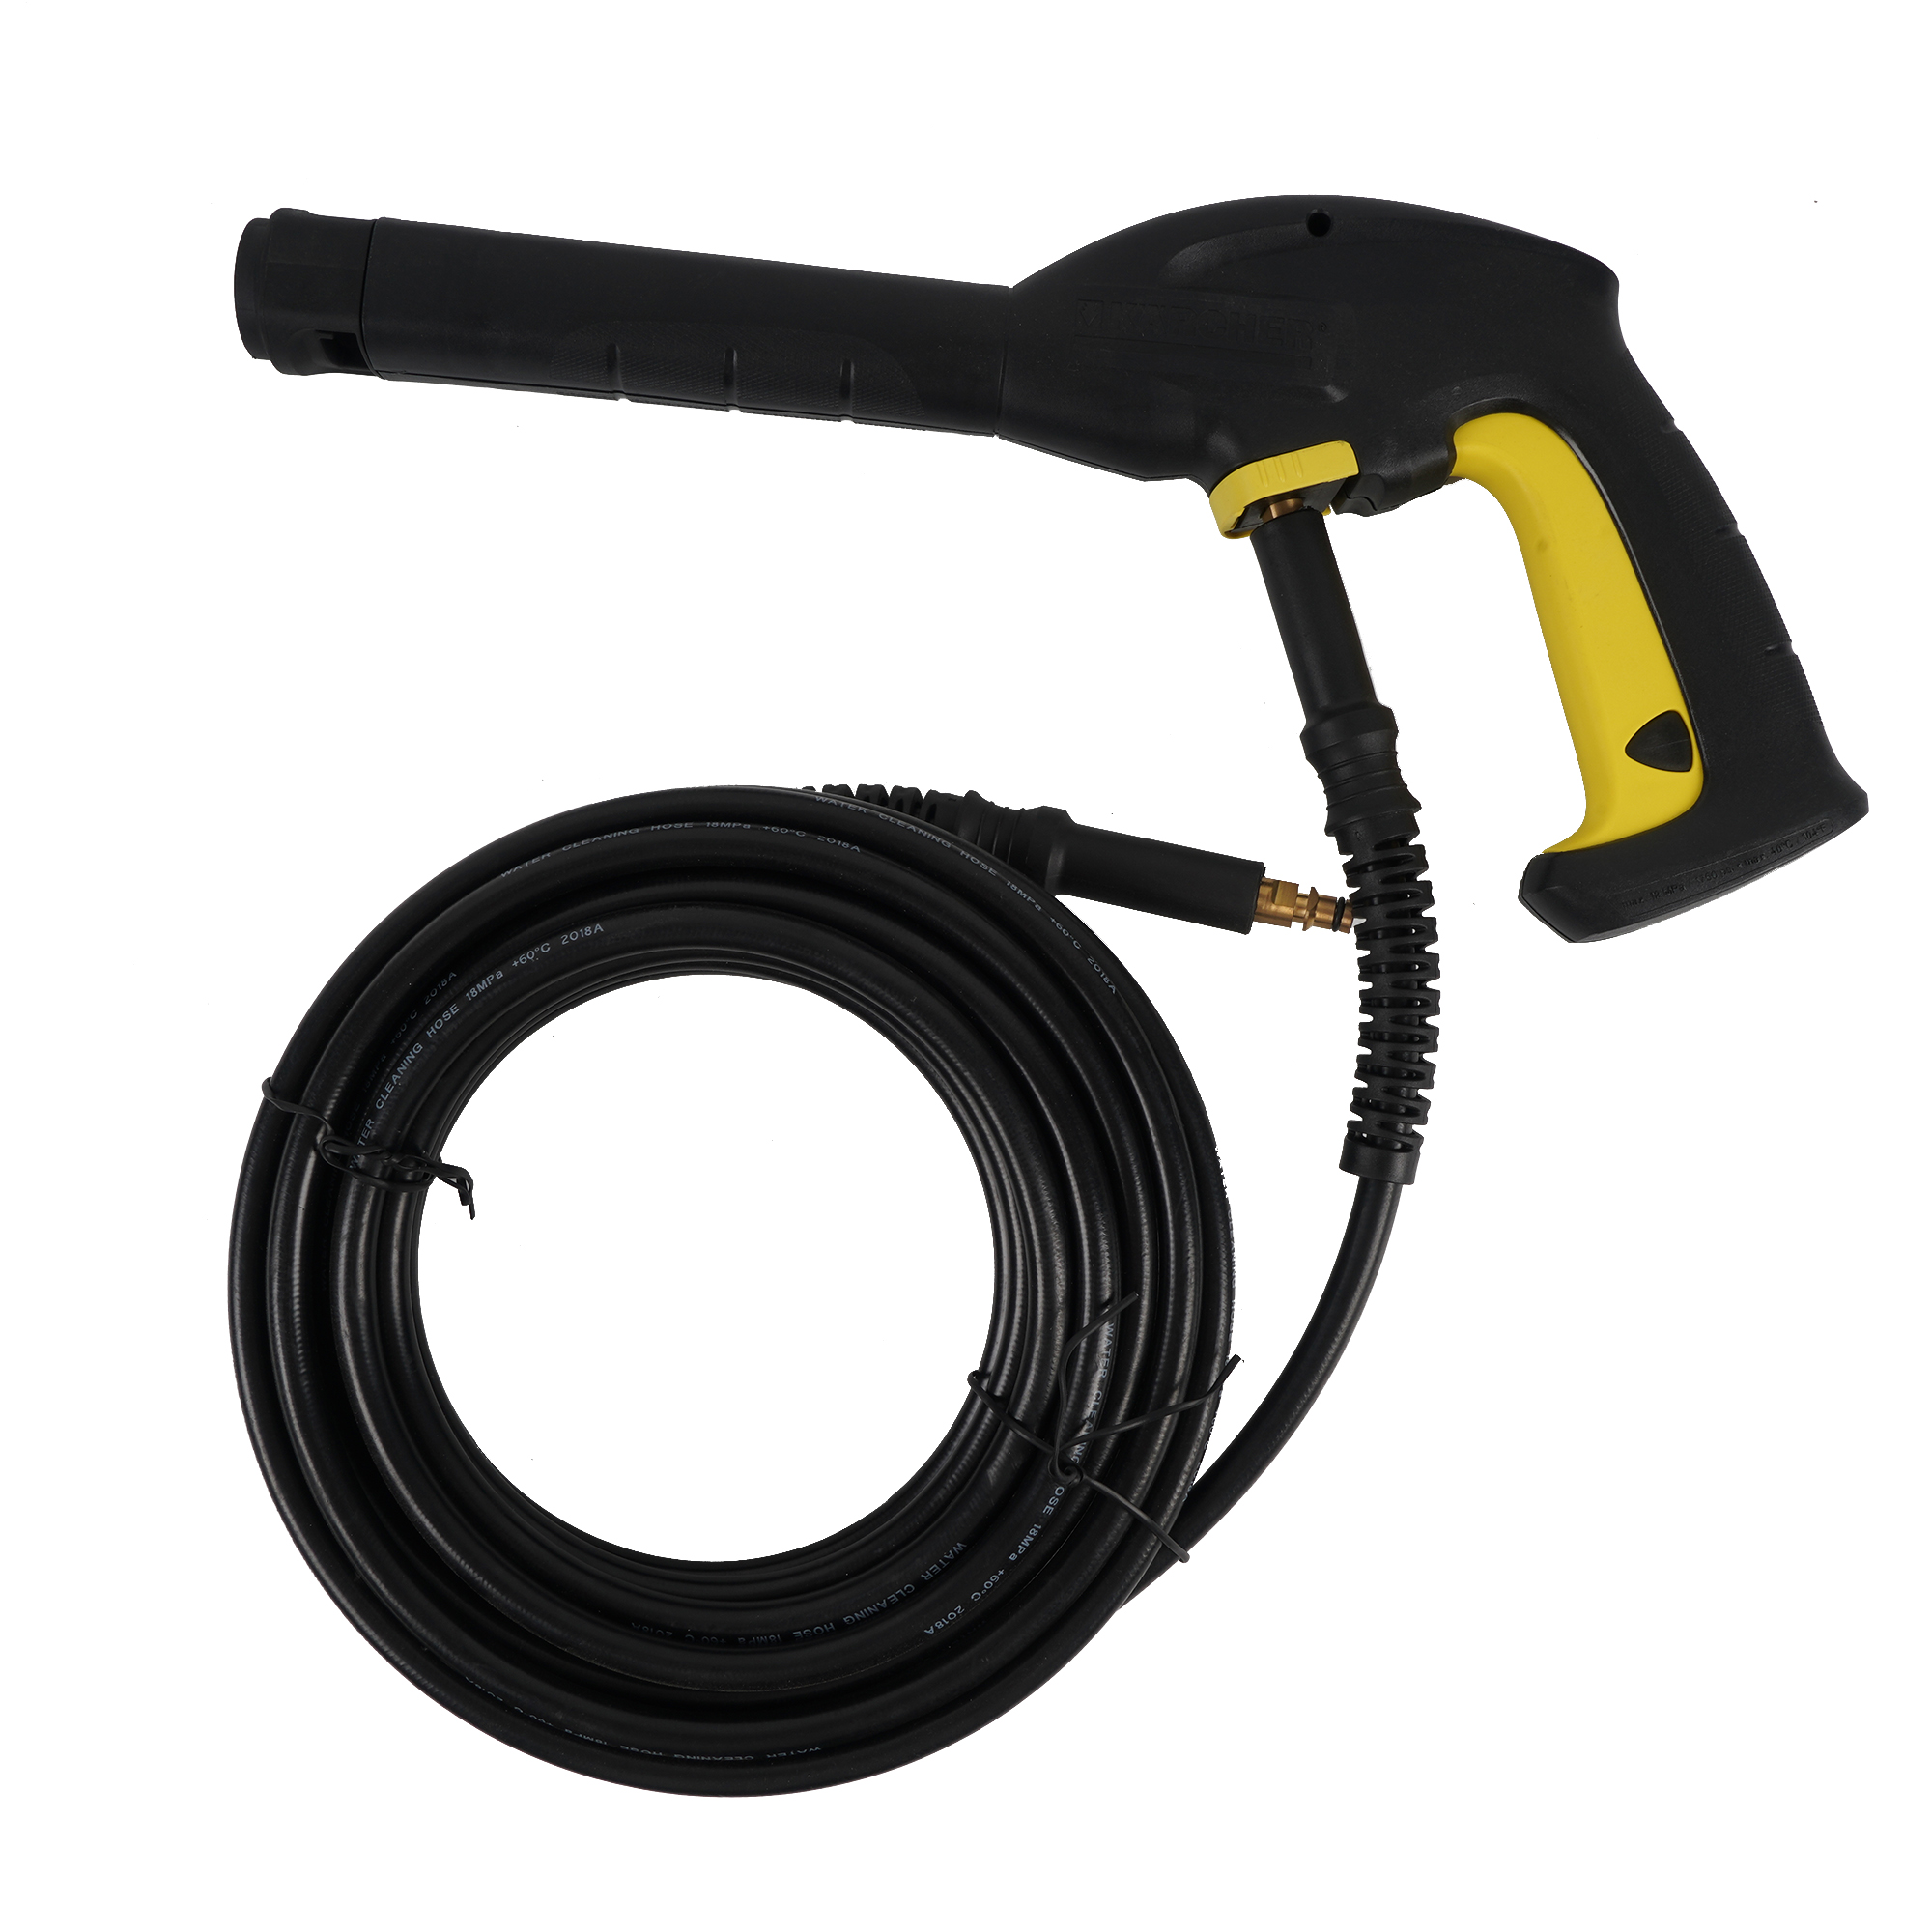 Car Washer Water Cleaning Extension Industrial Hose